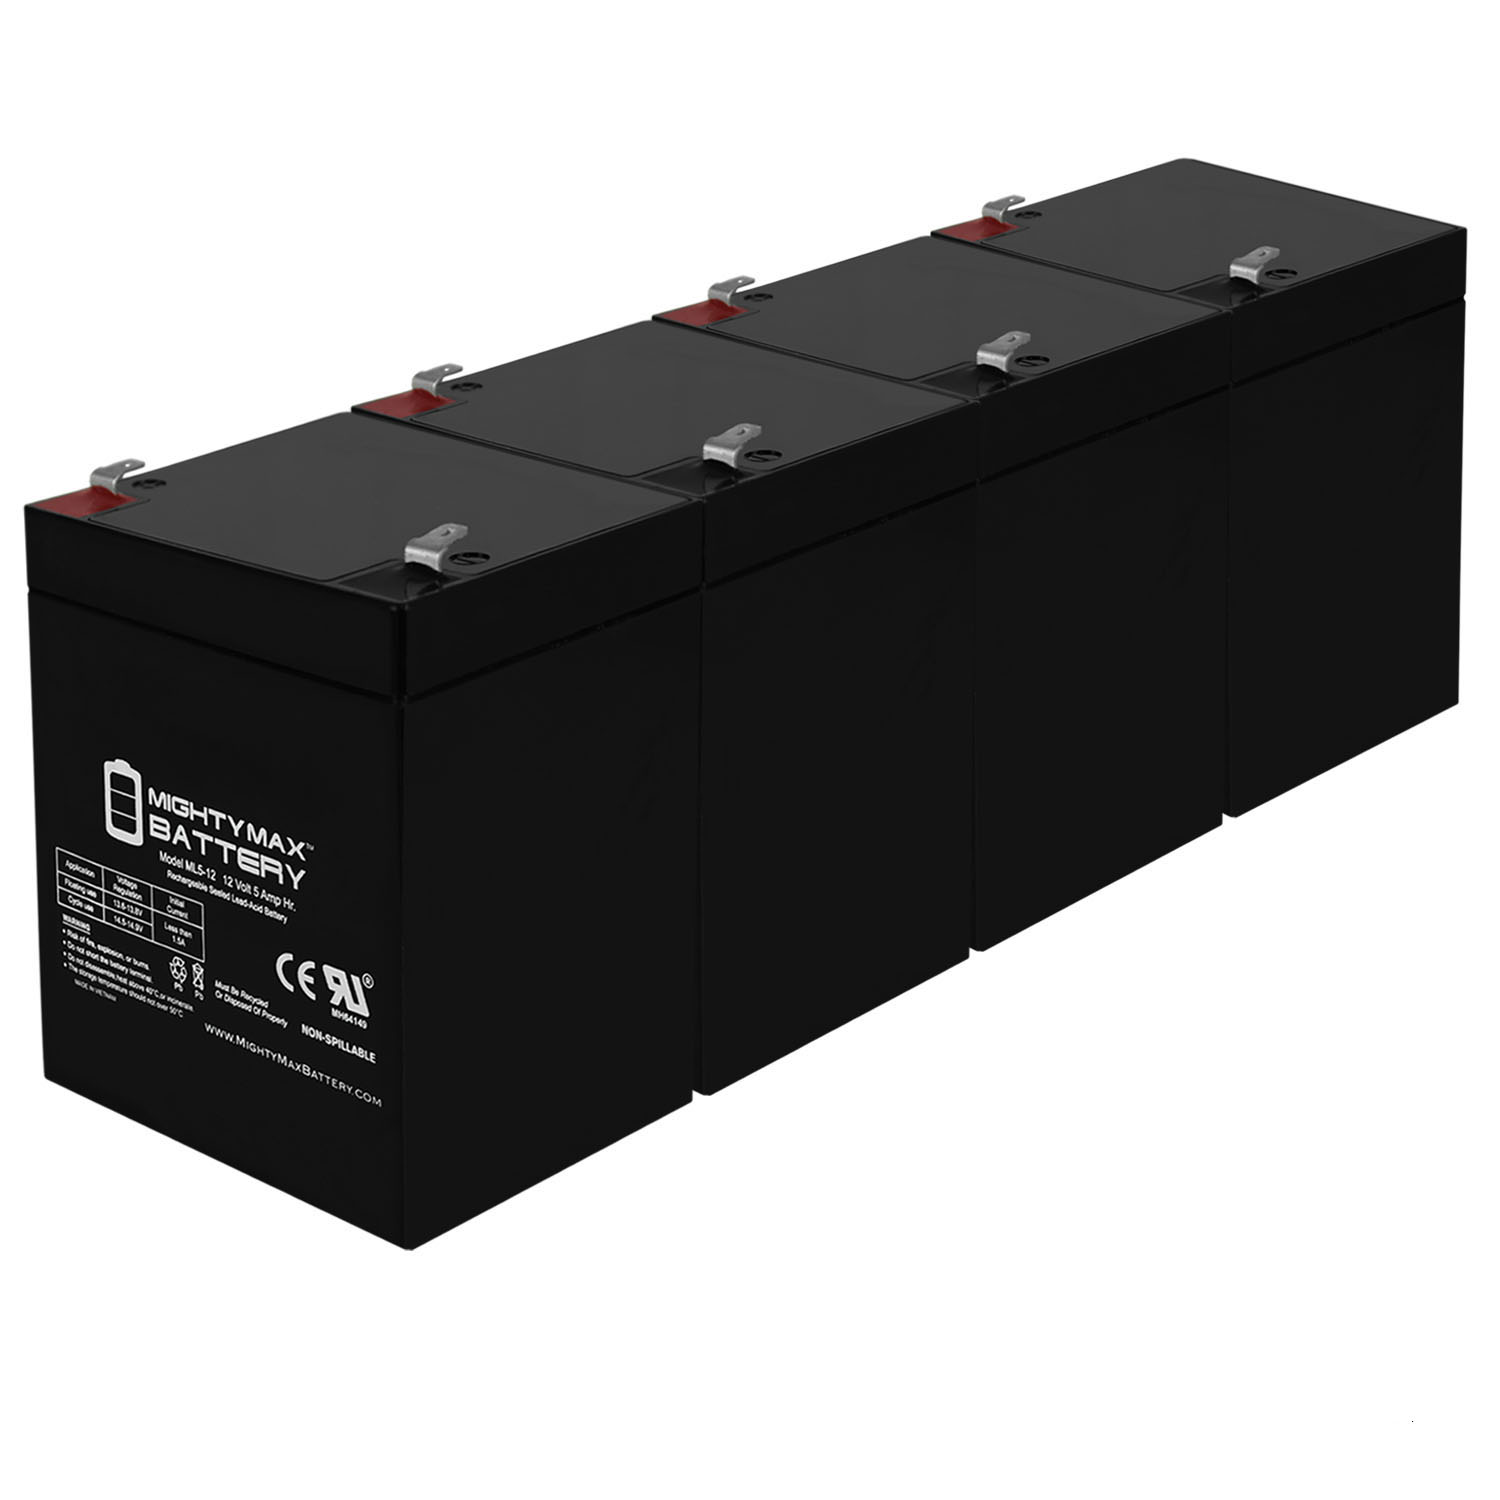 12V 5AH SLA Replacement Battery for Toshiba 1200 - 4 Pack